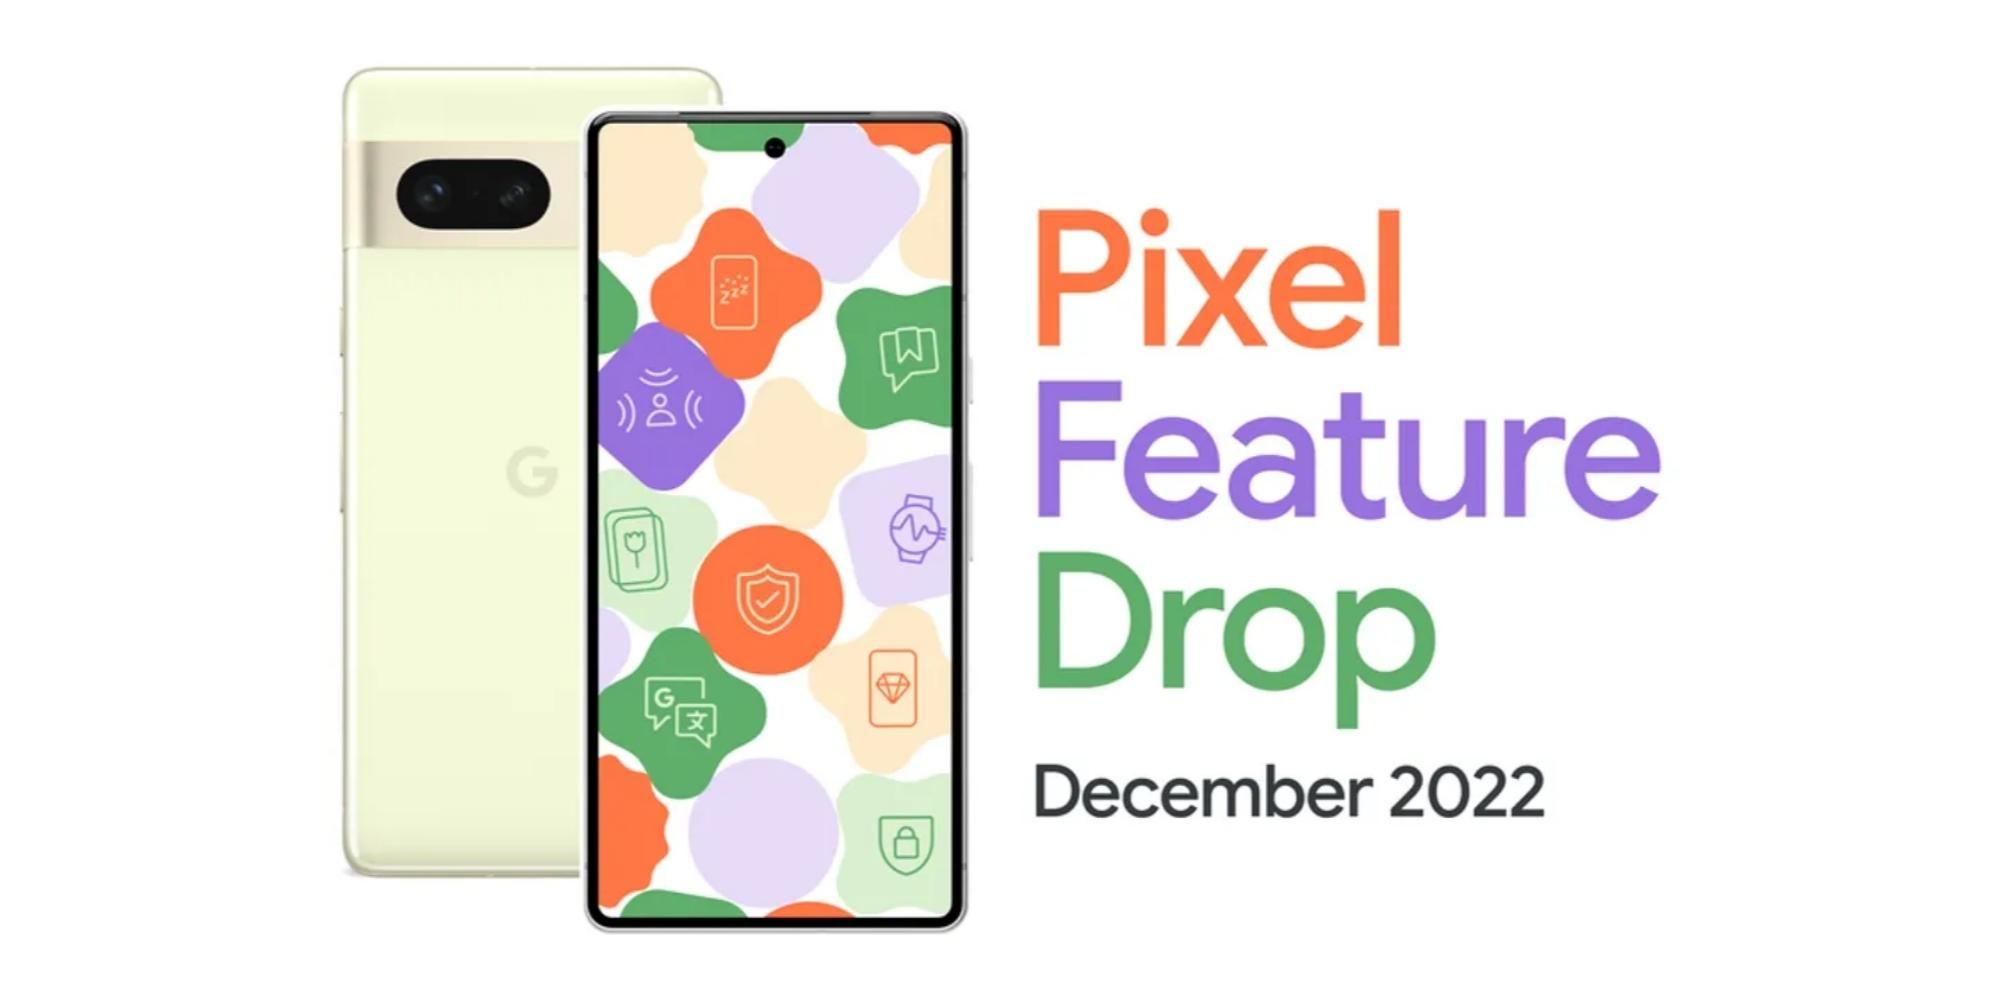 Pixel Feature Drop Everything New With Google's December 2022 Update